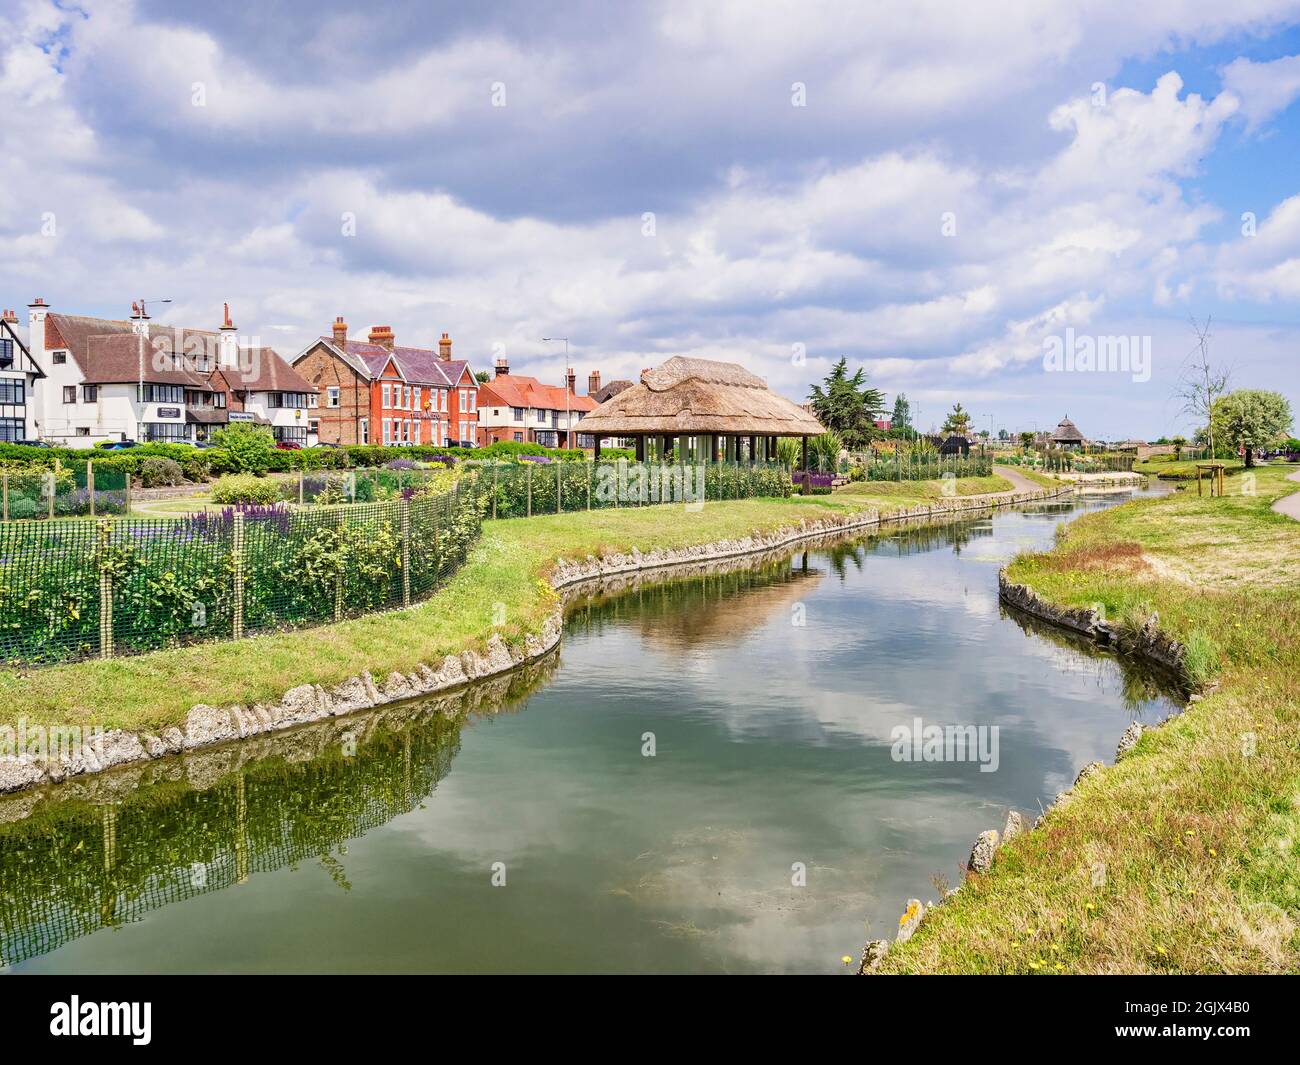 20 June 2019: Great Yarmouth, UK - Part of the Venetian Waterways and Boating Lake, Great Yarmouth, Norfolk. Dating from 1928, the park has been resto Stock Photo